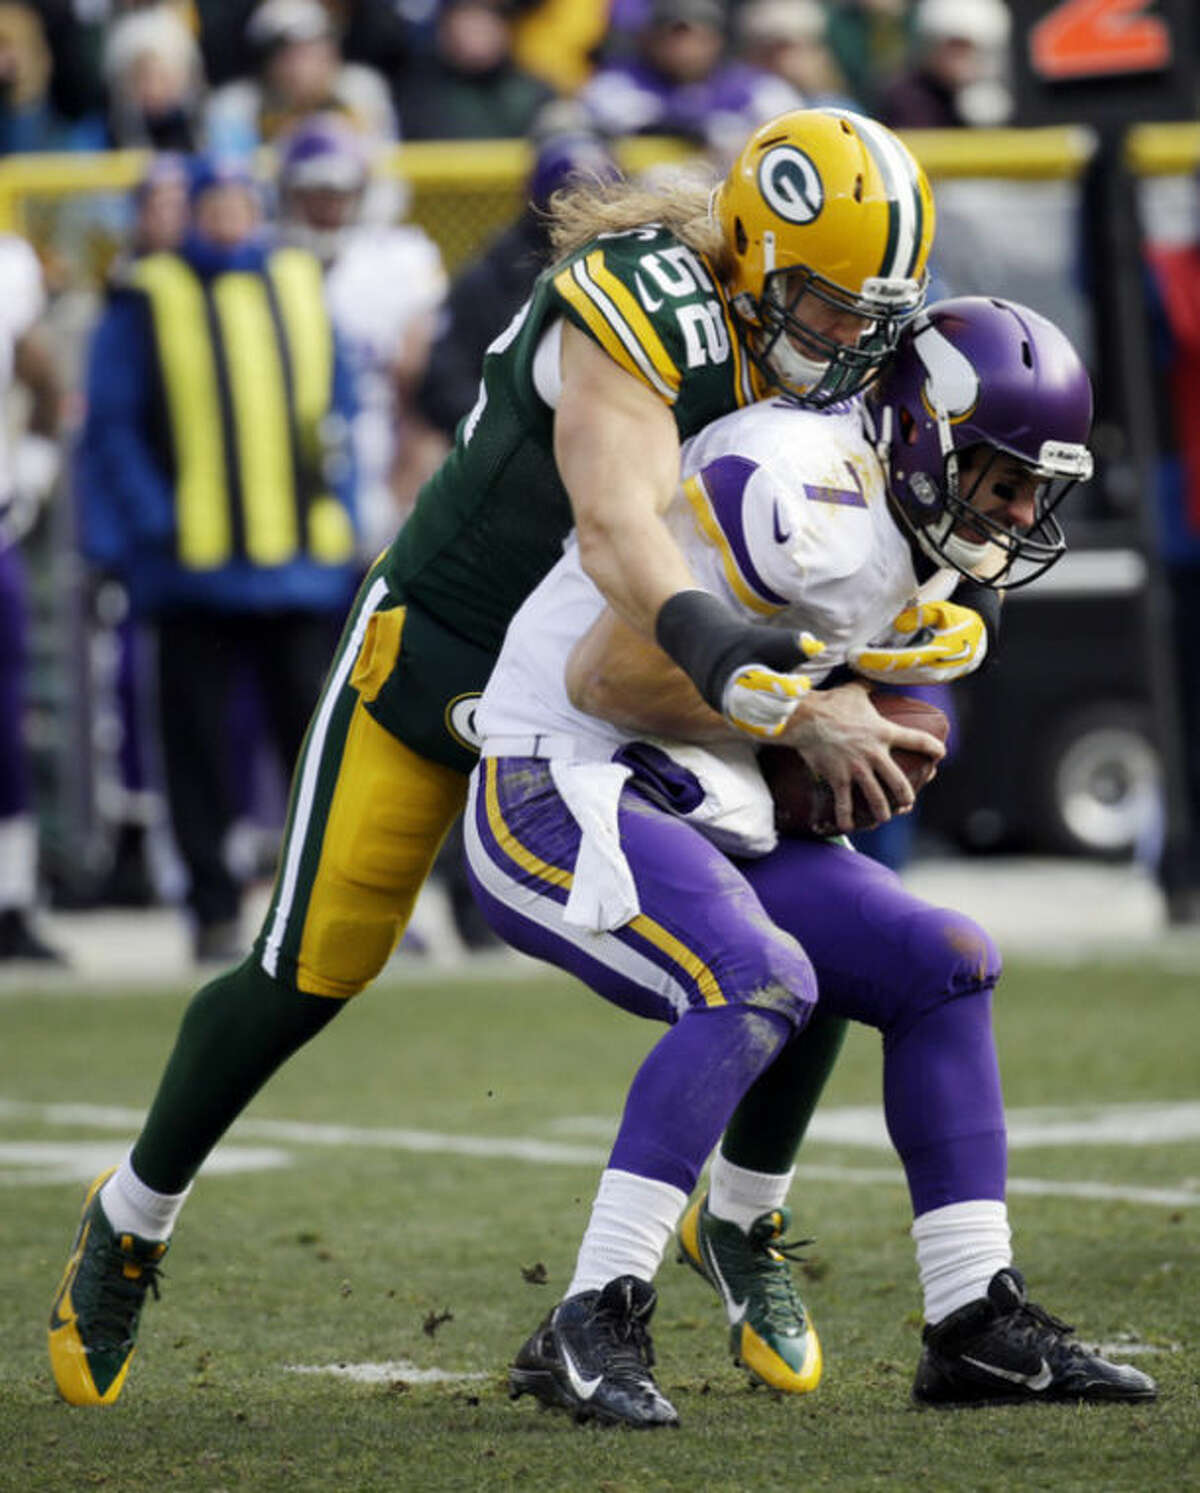 Green Bay Packers' Clay Matthews sacks Minnesota Vikings quarterback Christian Ponder during the first half of an NFL football game Sunday, Nov. 24, 2013, in Green Bay, Wis. (AP Photo/Mike Roemer)